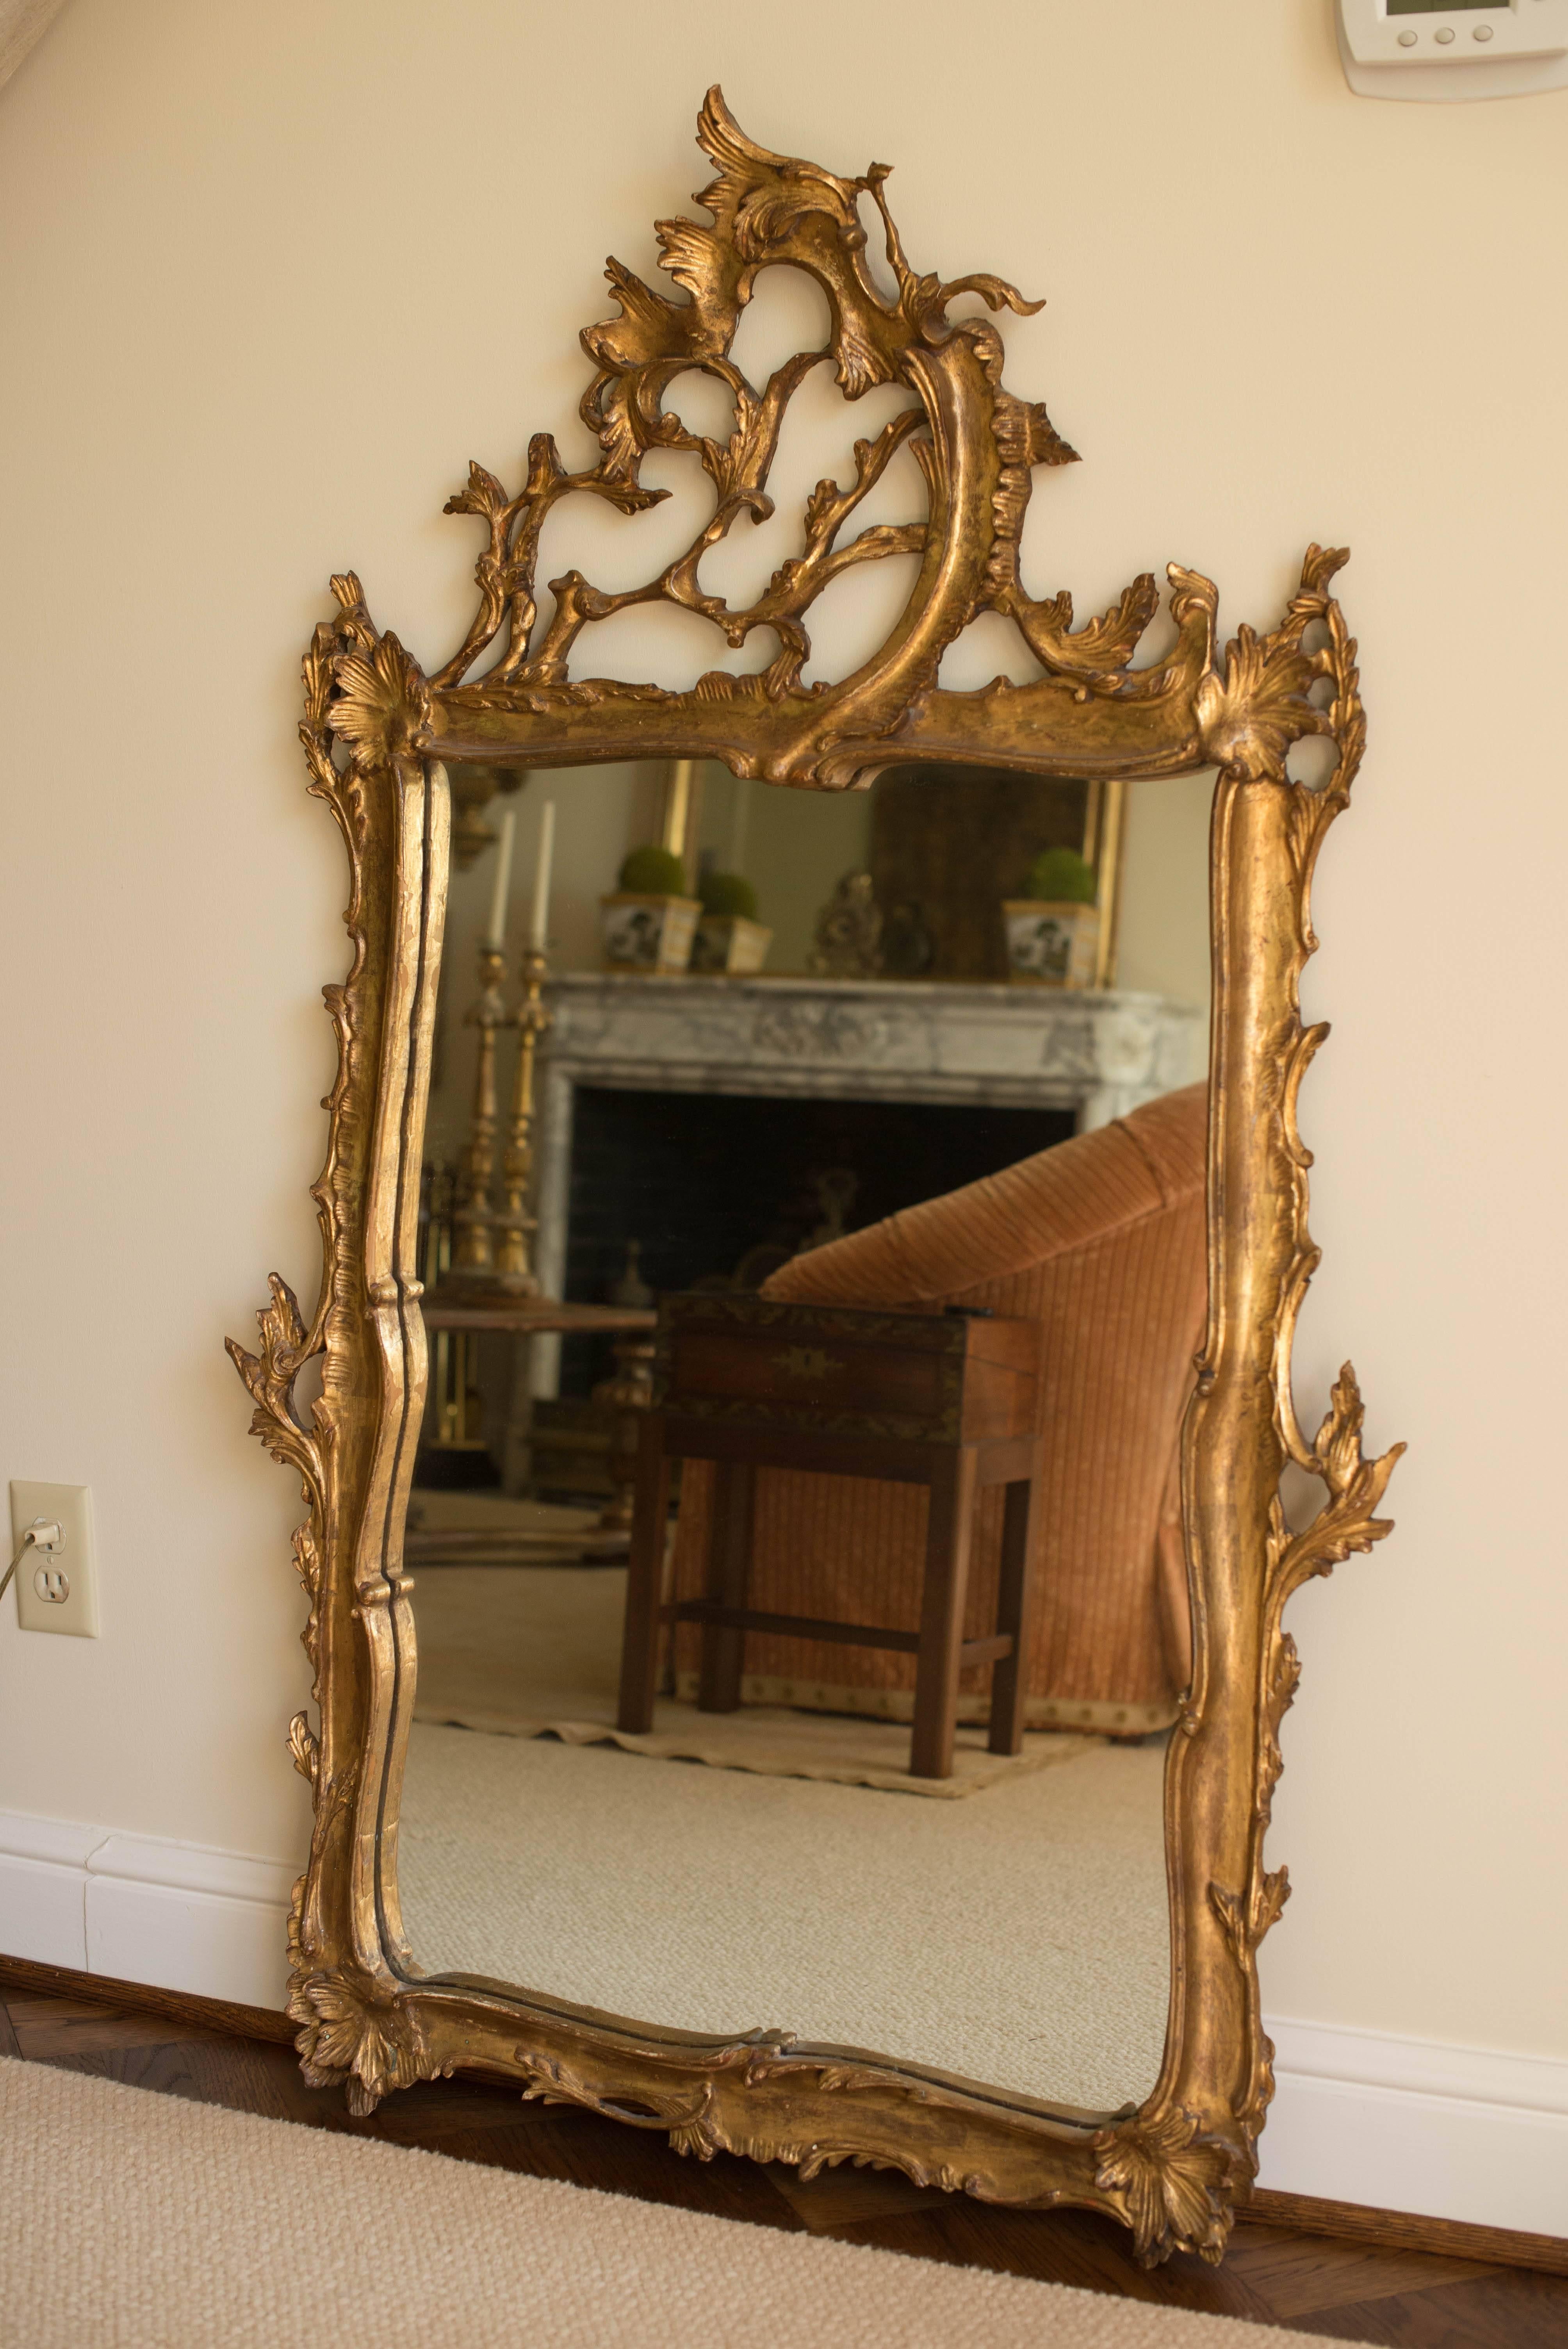 This Italian ornately carved giltwood mirror features a lovely leafy design. It was likely made in the mid-20th century and is in excellent condition.